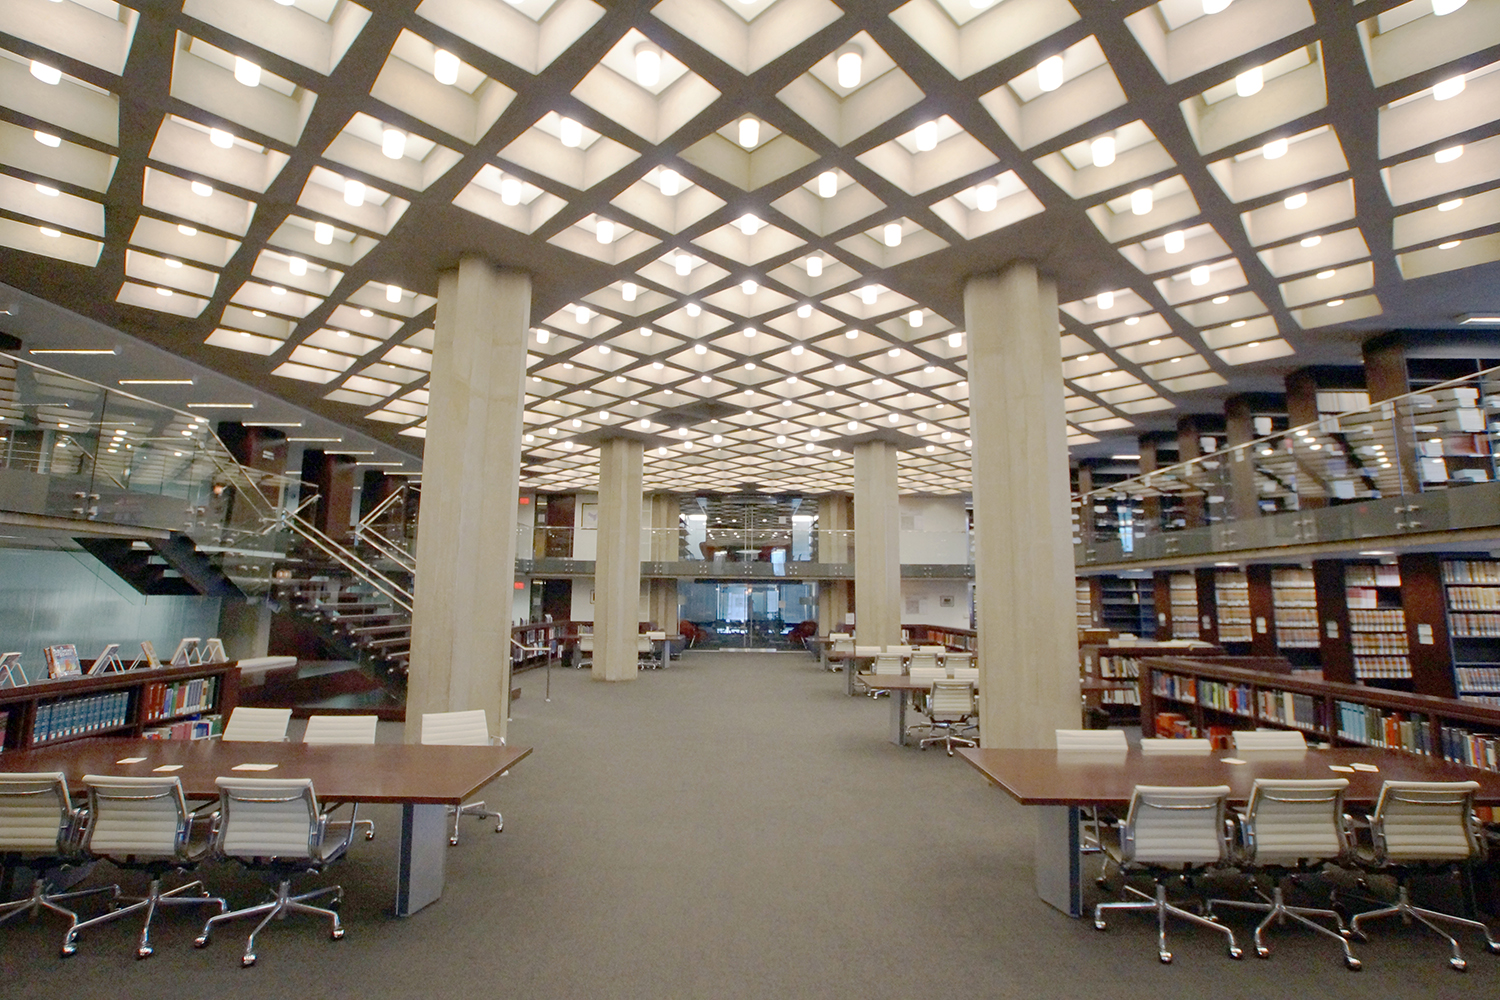 Cane cylinder ceiling luminaires in education lighting design, seen here mounted in recessed square cutouts above a campus library.